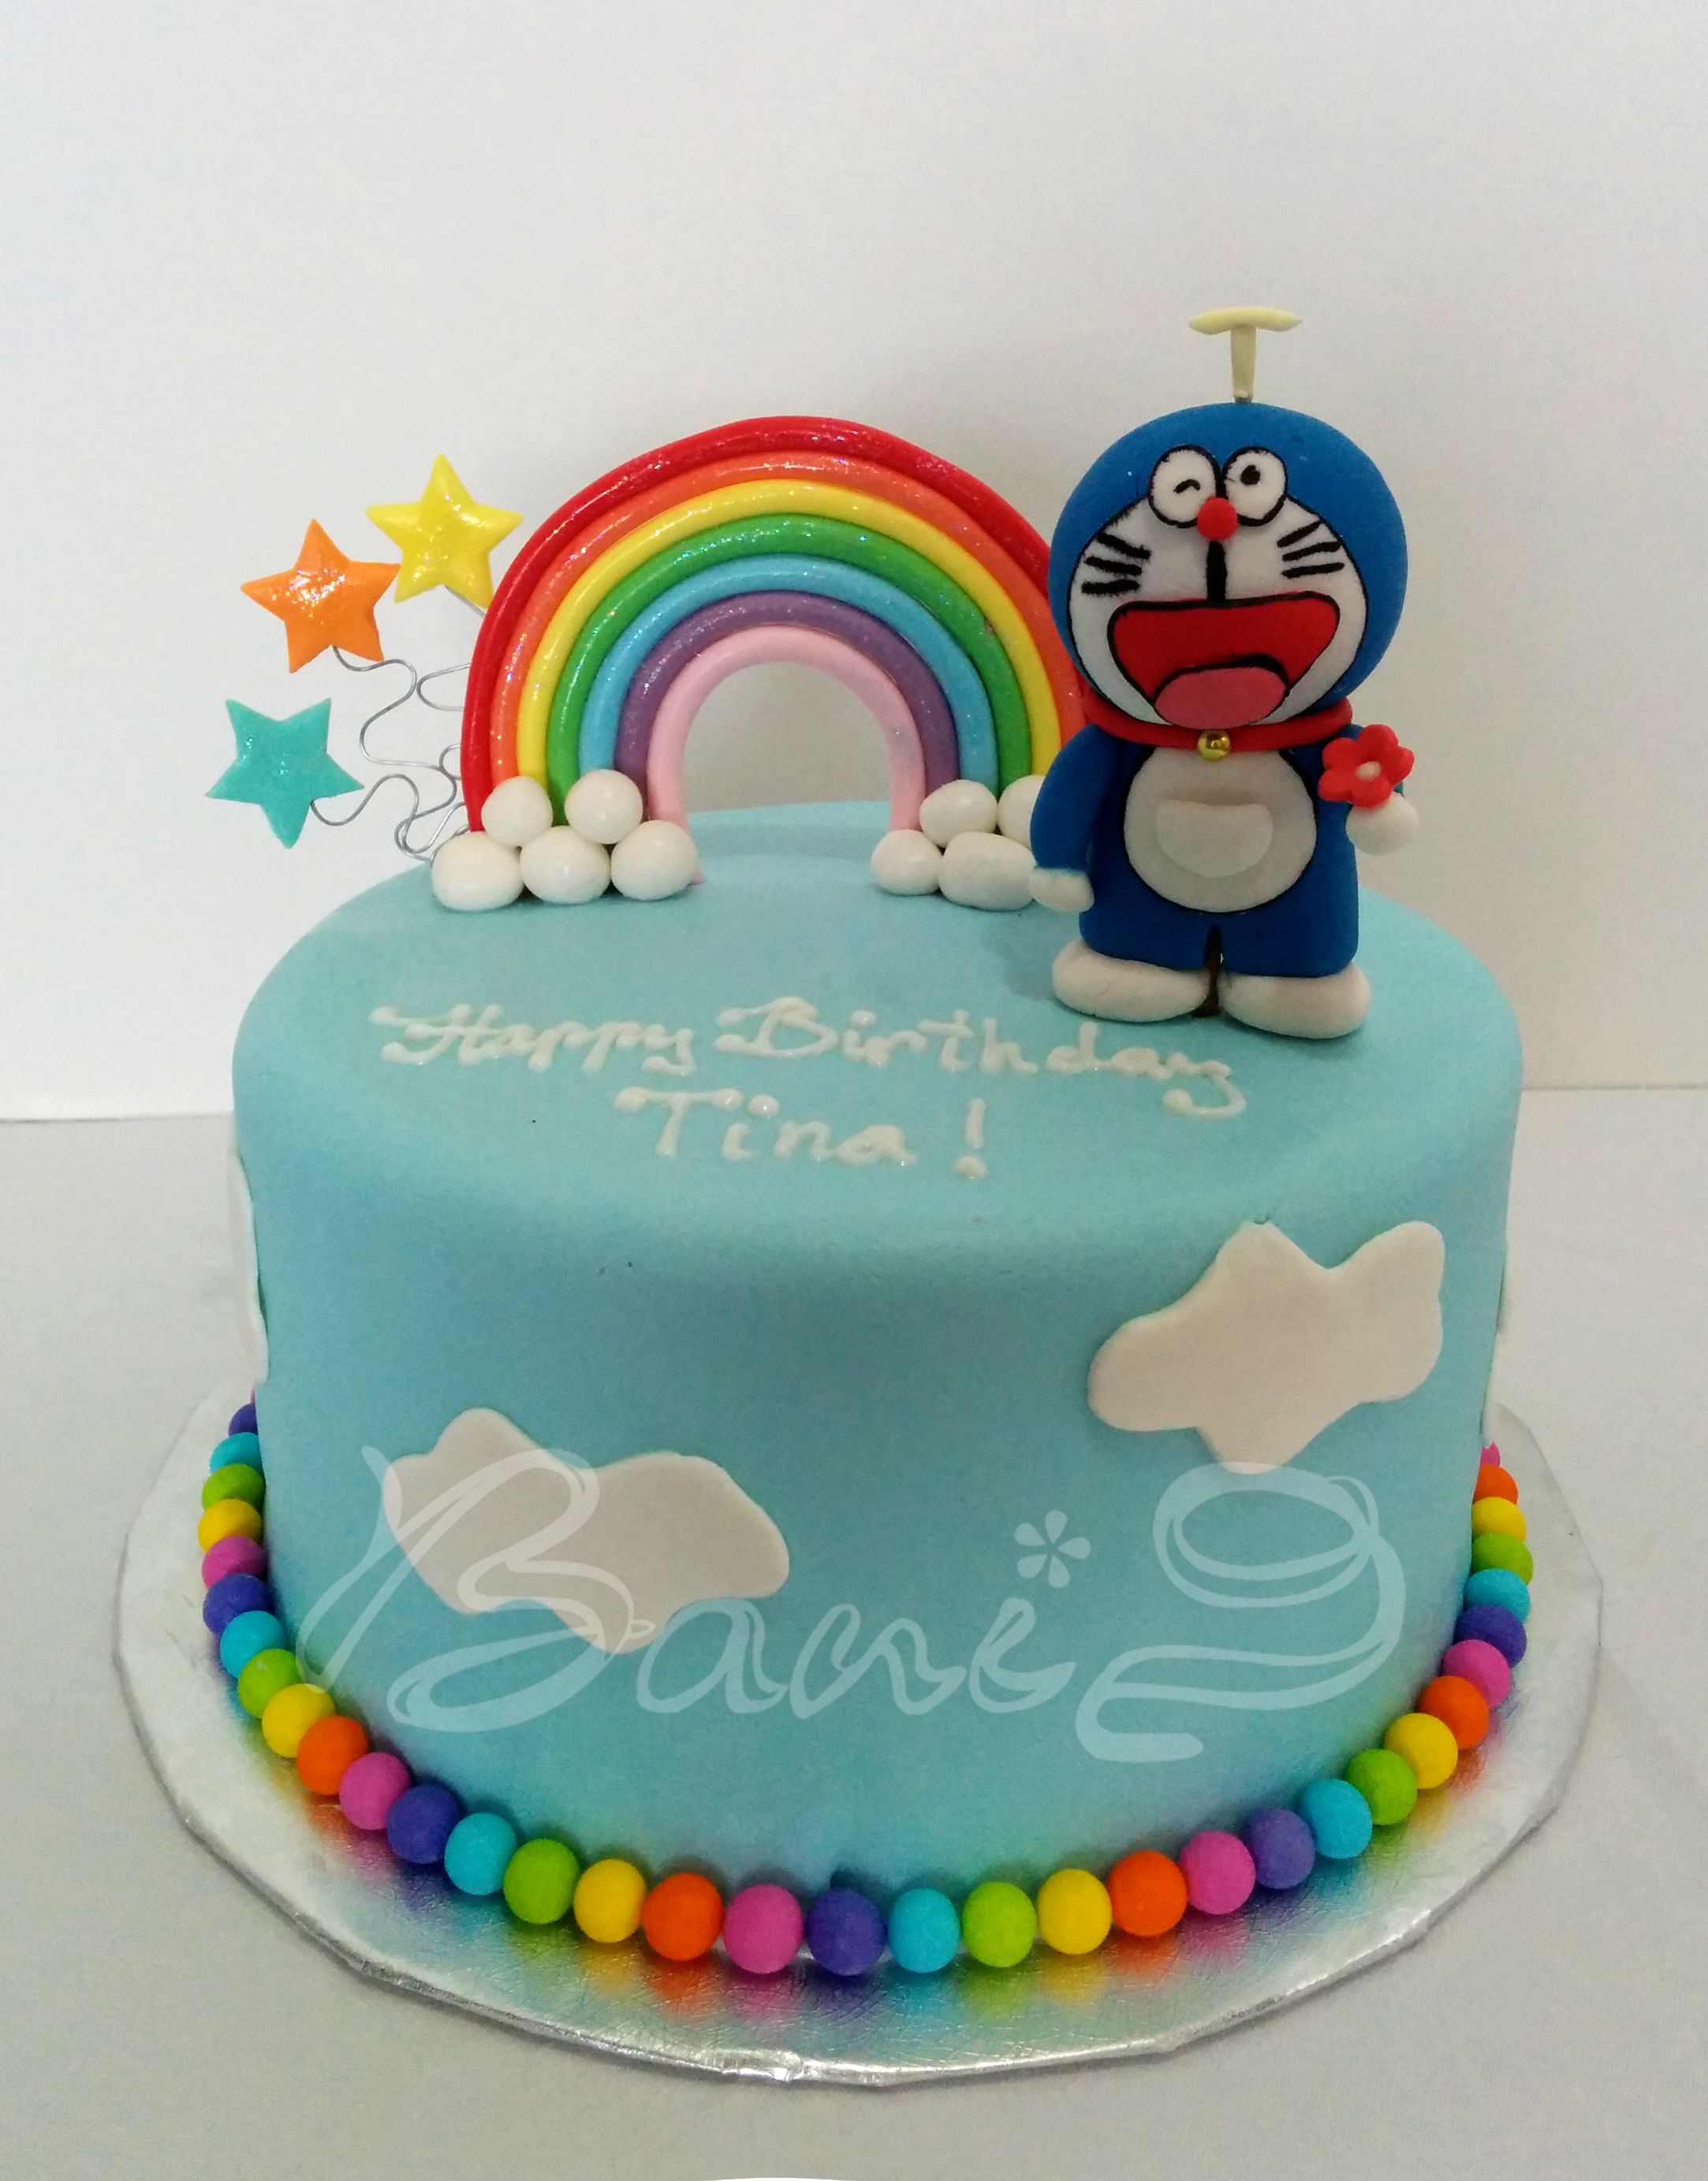 Blue colored with rainbow and clouds Doraemon-Themed Cake